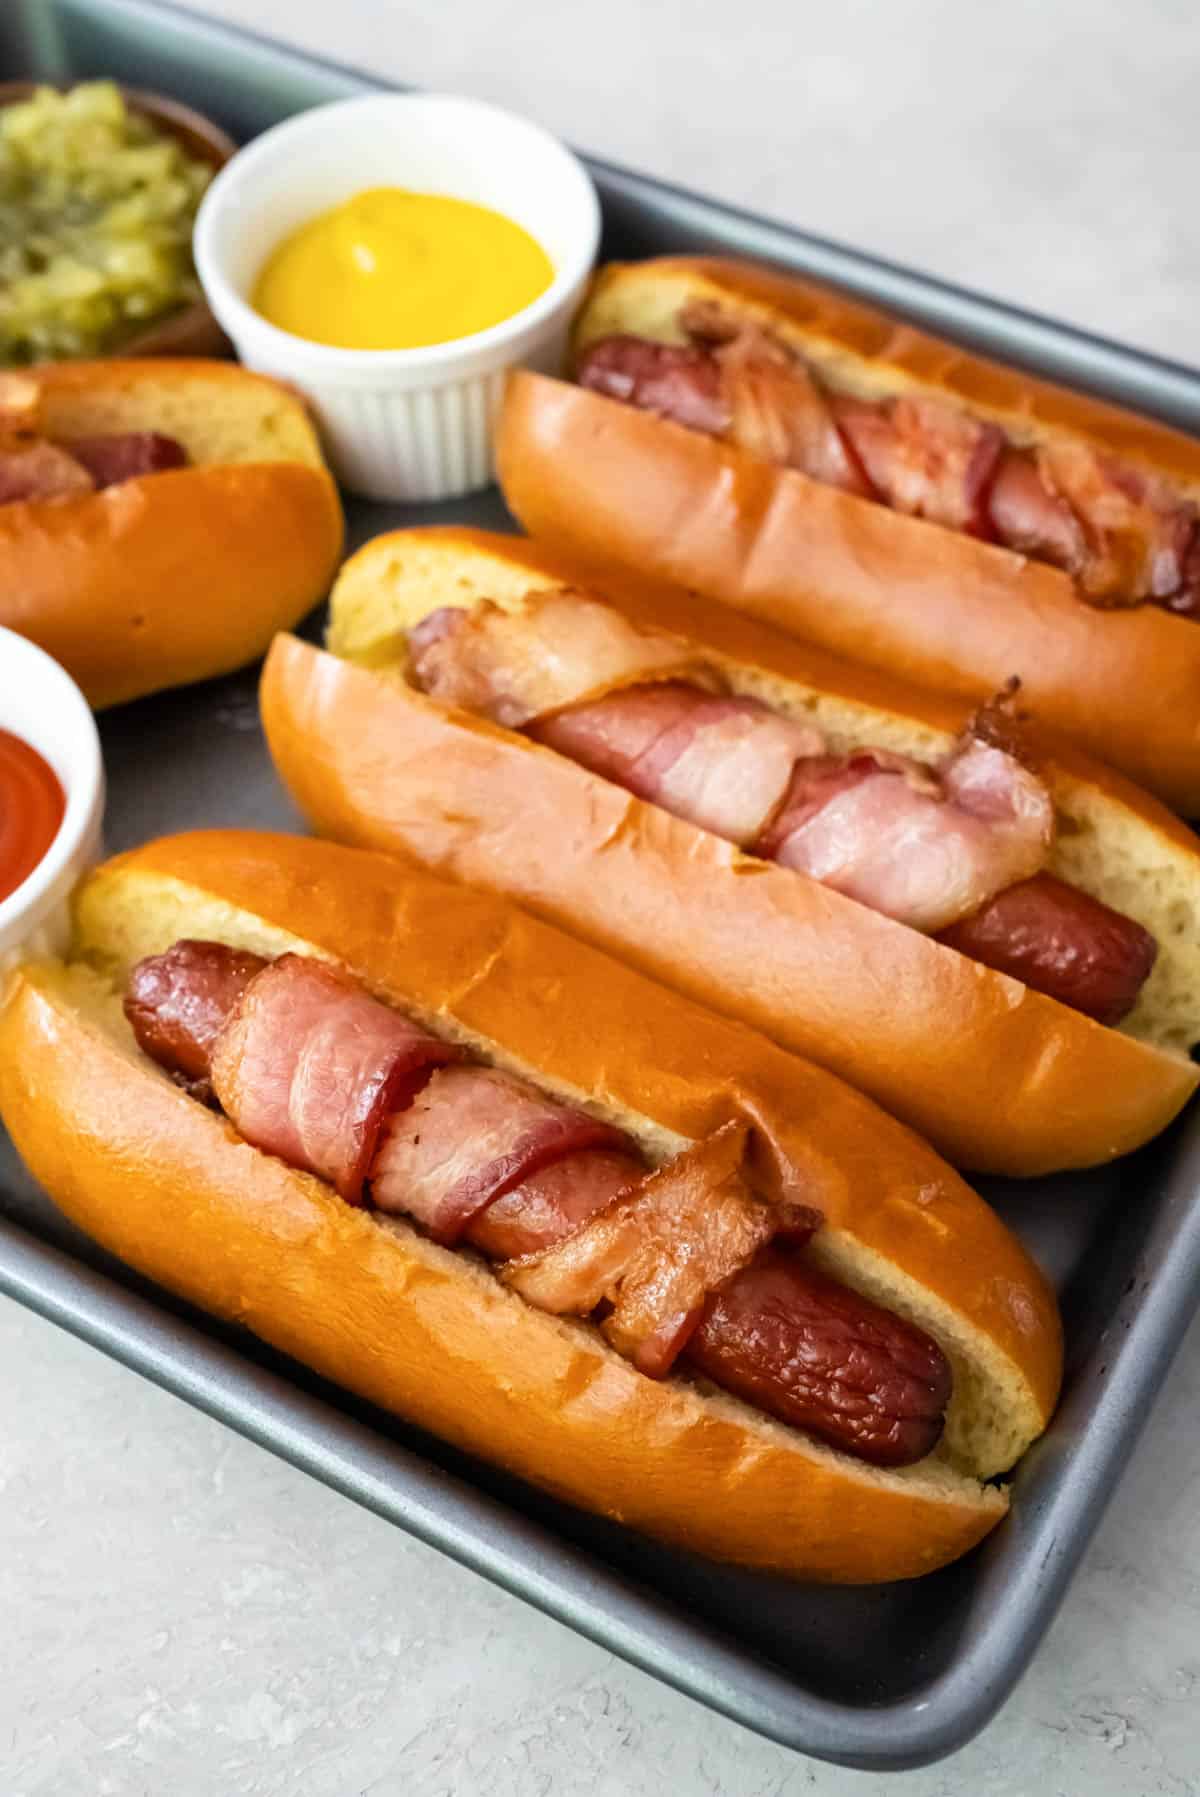 Air fryer bacon wrapped hot dogs on buns on a baking sheet.